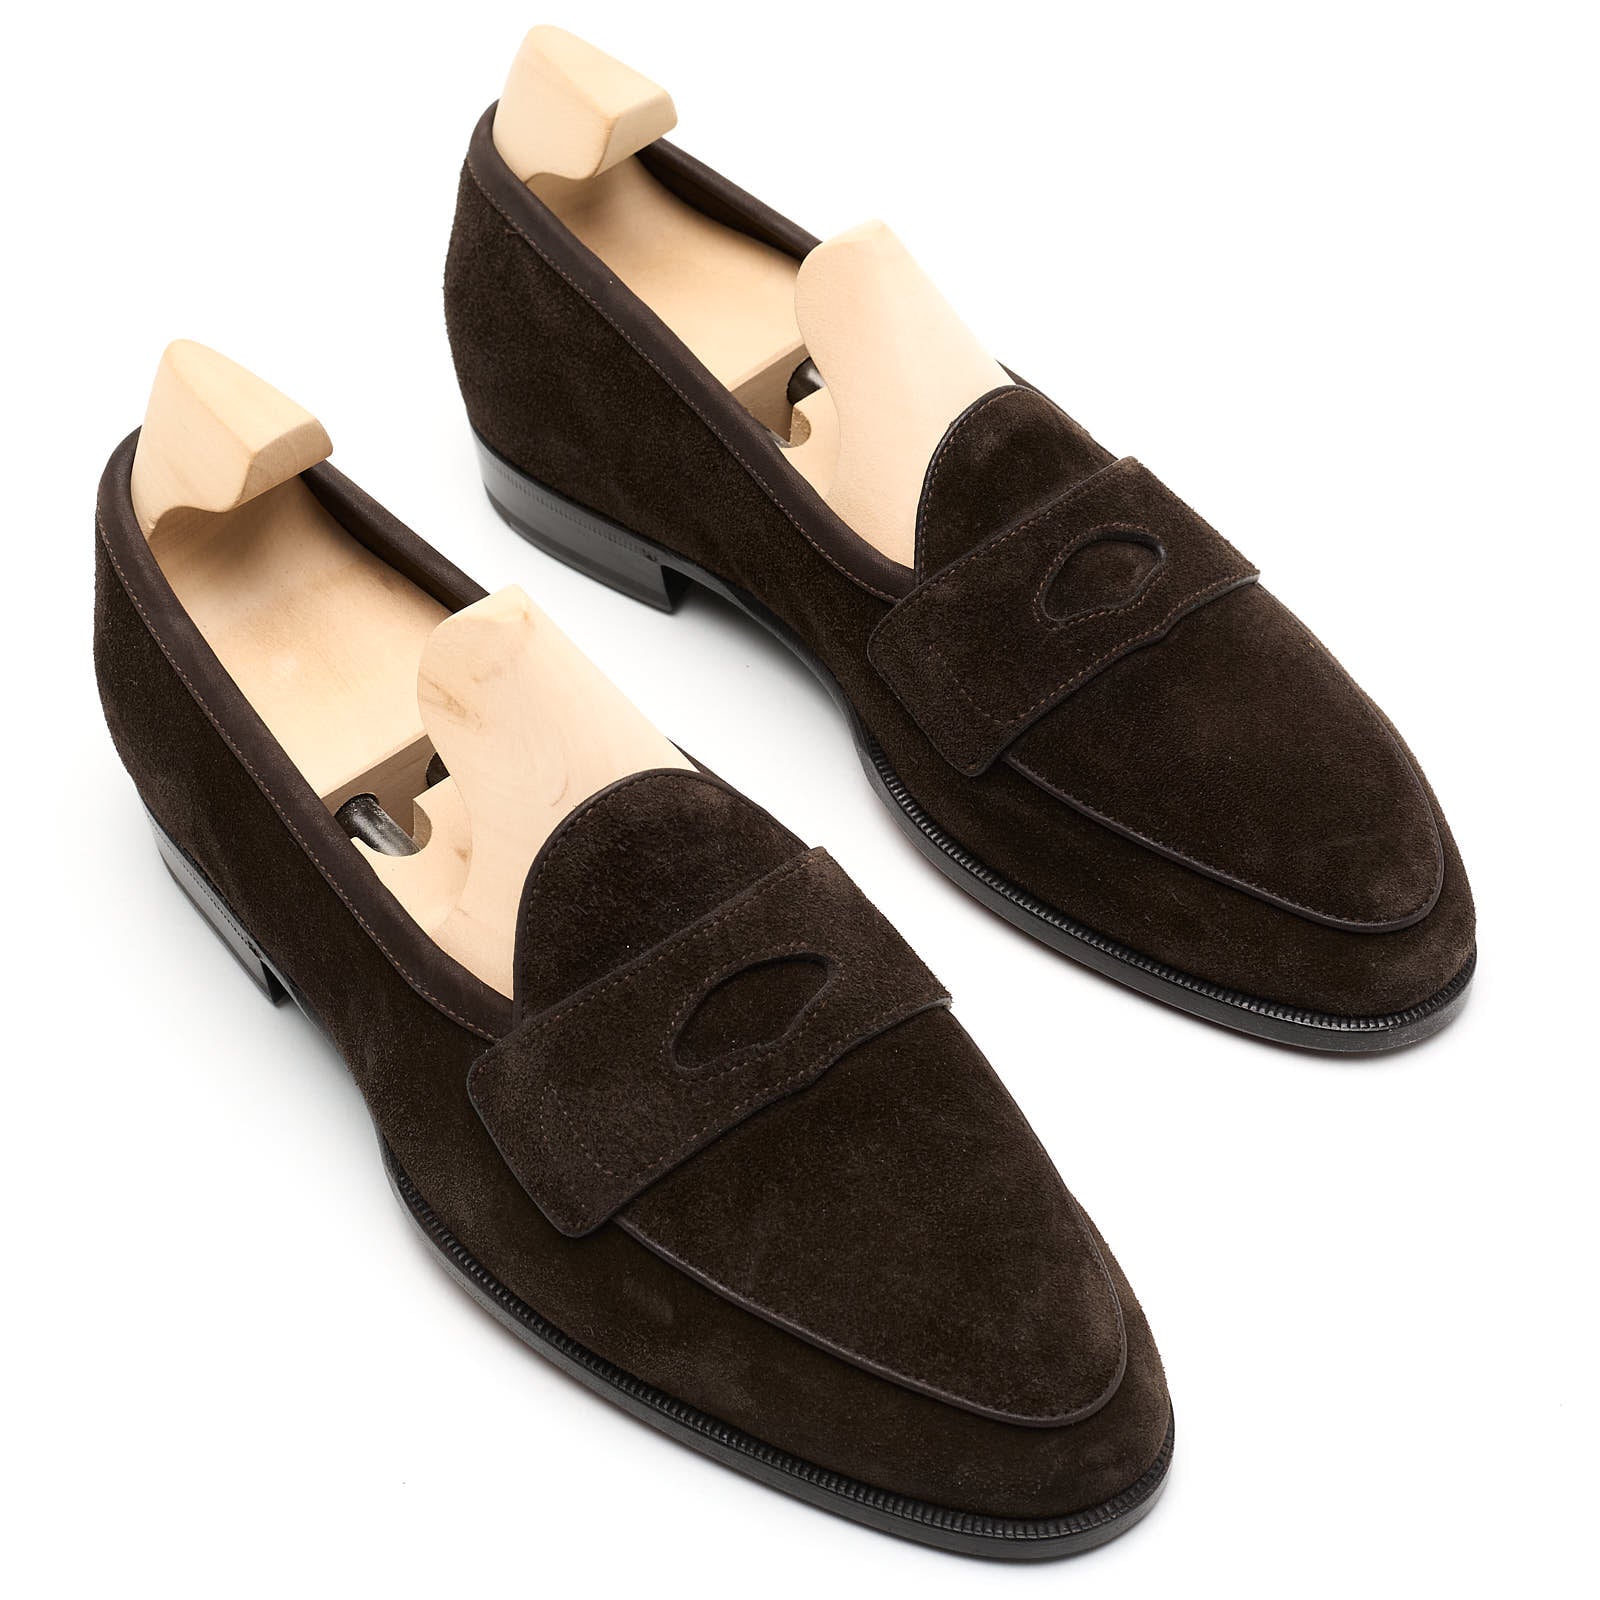 BAUDOIN & LANGE Grand Fenelon Brown Suede Leather Penny Loafers EU 41 NEW US 8